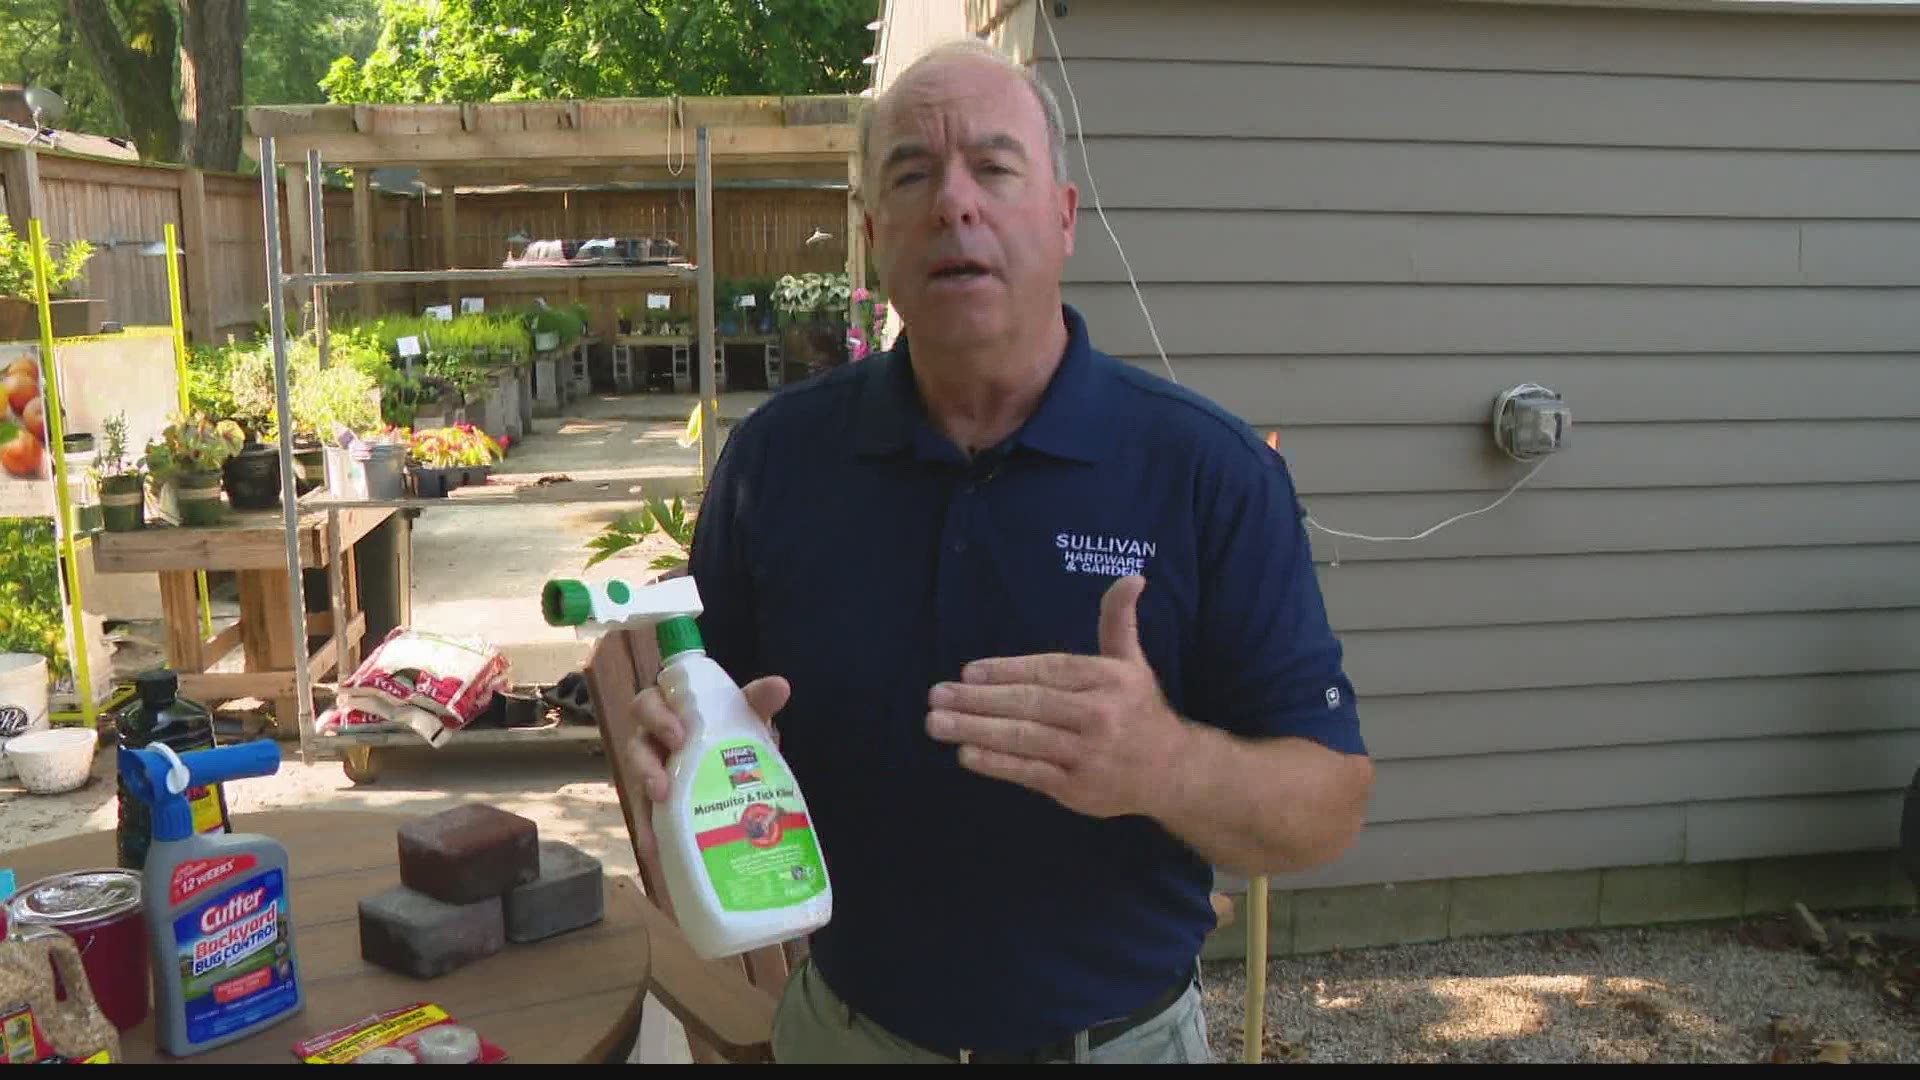 Summer is peak season for mosquitoes, so Pat Sullivan shares products and tactics and for keeping them off your skin.